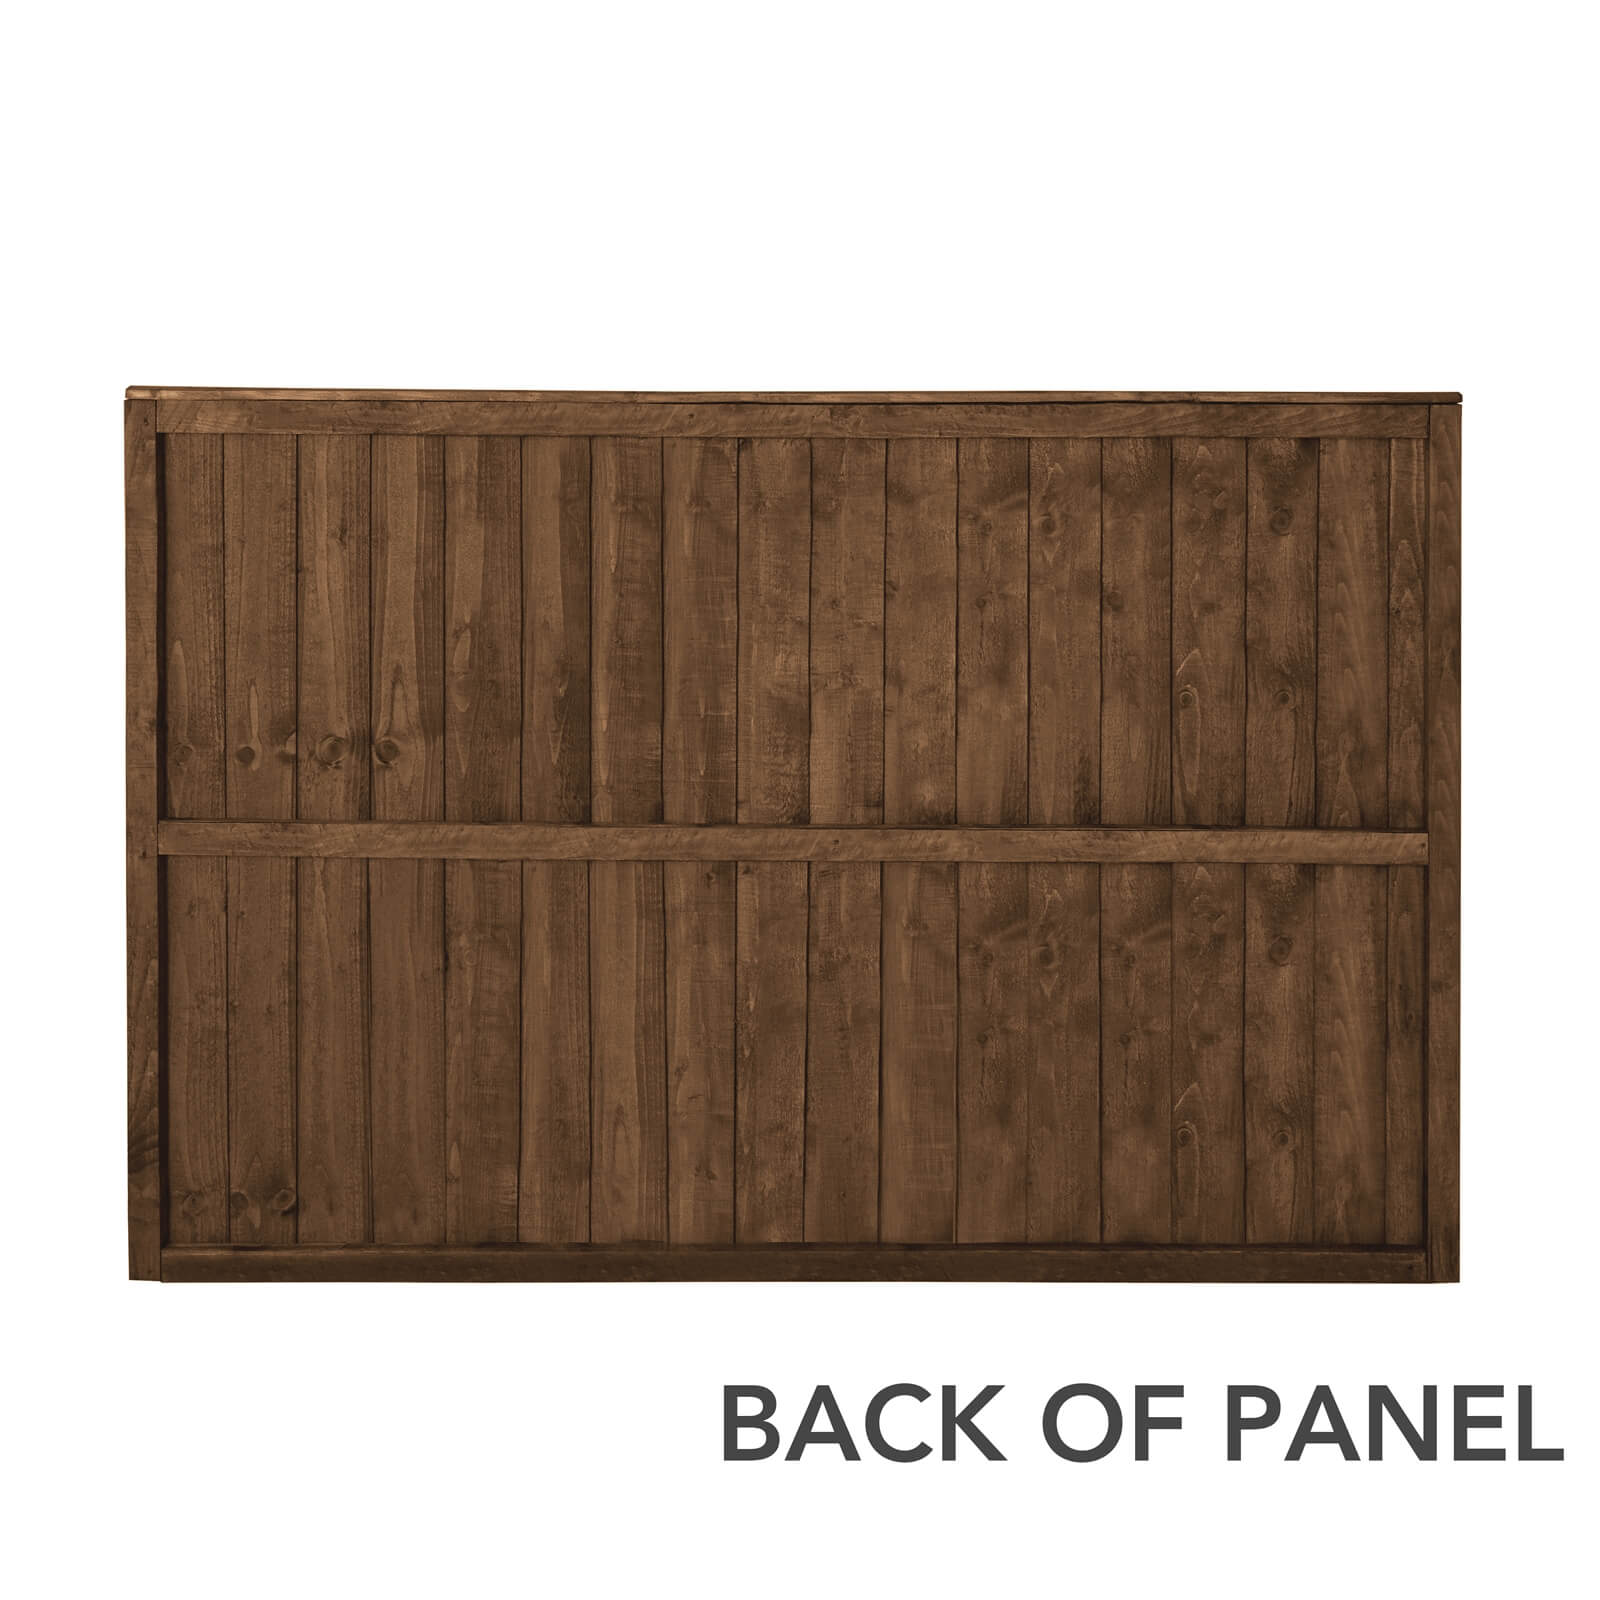 6ft x 4ft (1.83m x 1.23m) Pressure Treated Featheredge Fence Panel (Dark Brown) - Pack of 3